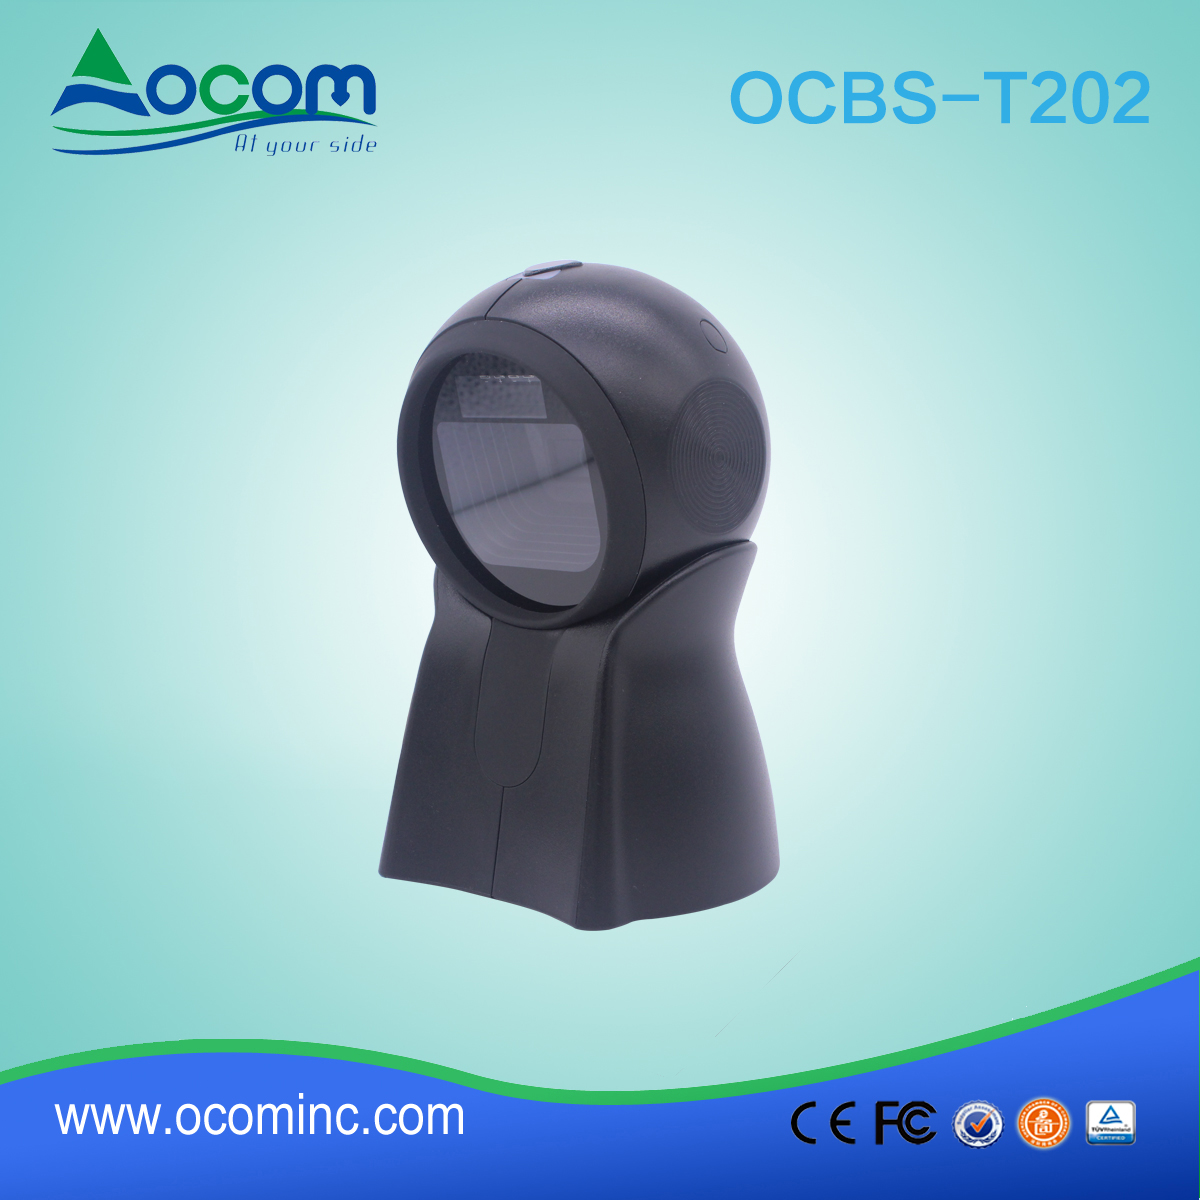 OCBS-T202： high speed POS 2d barcode scanner for supermarket